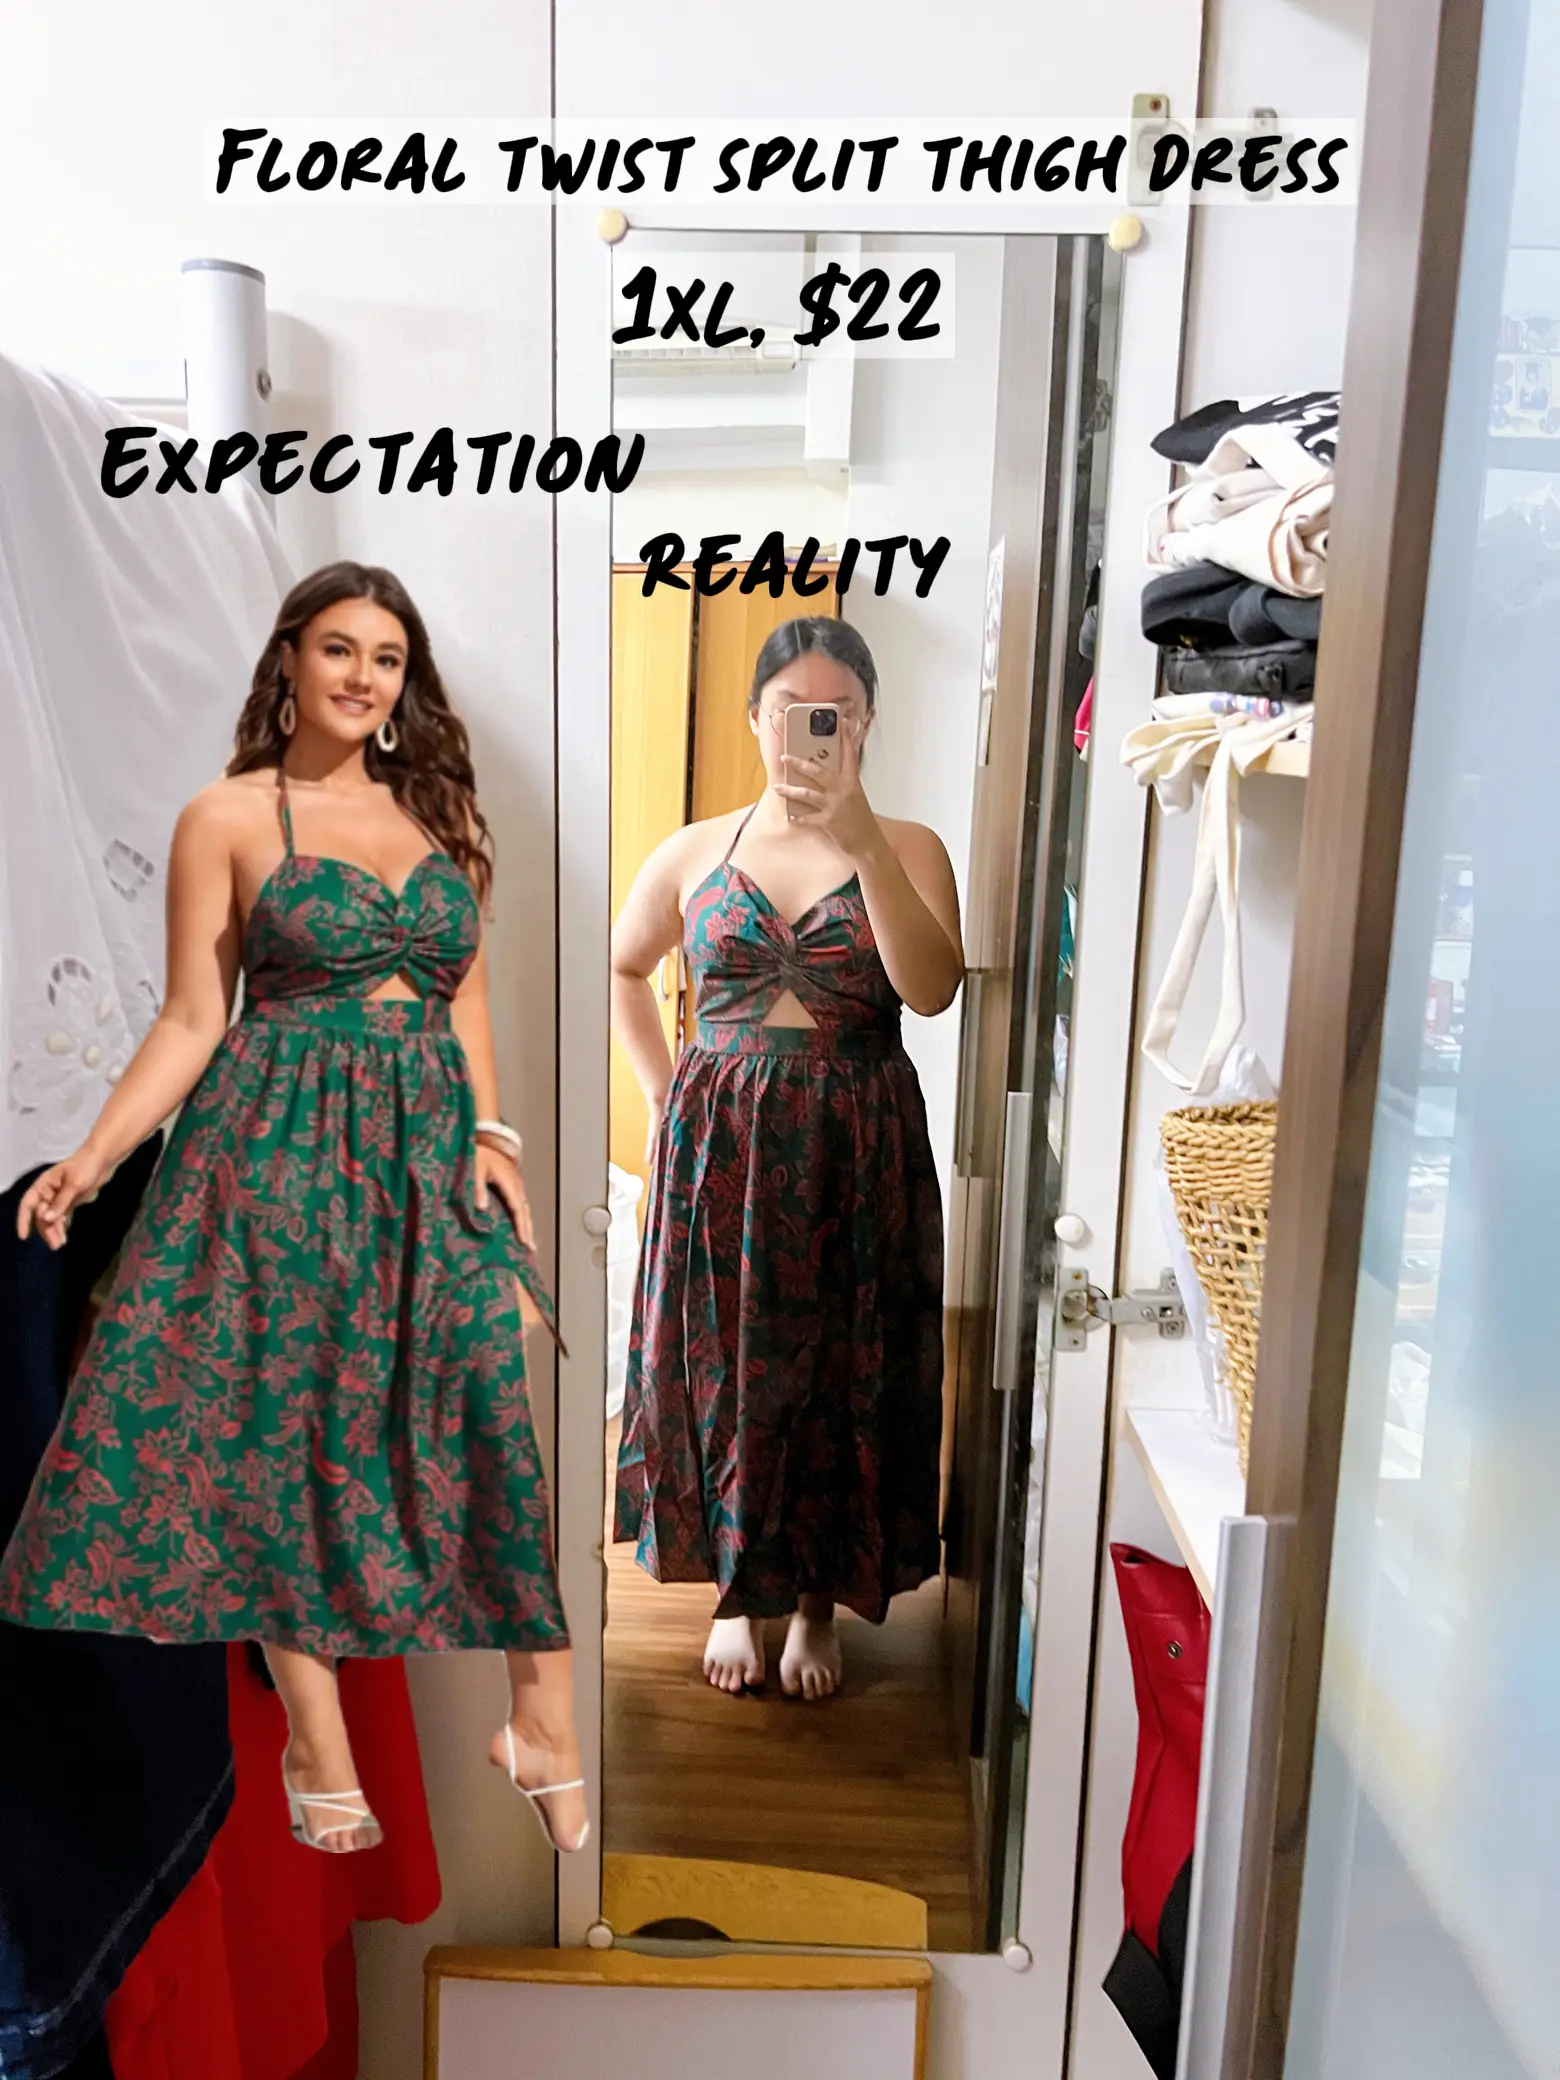 I'm plus-size - 6 dresses I love from Shein, they go up to size 4XL  including a $22 score